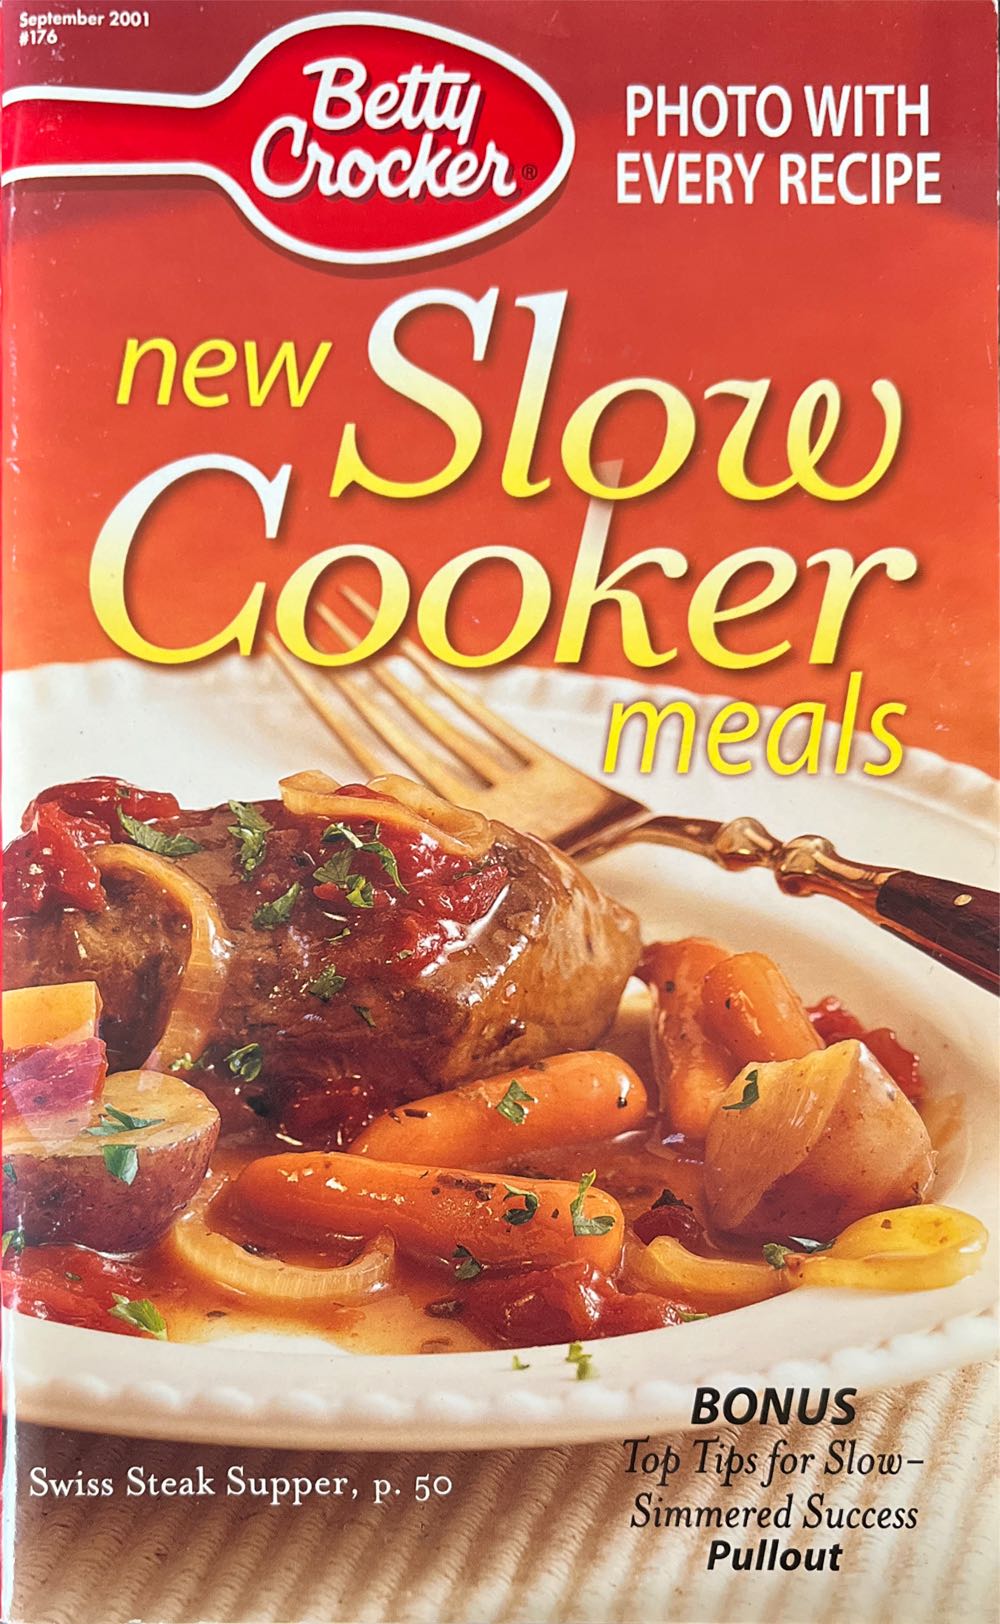 Betty Crocker New Slow Cooker Meals  (September) magazine collectible [Barcode 07165802399476] - Main Image 1